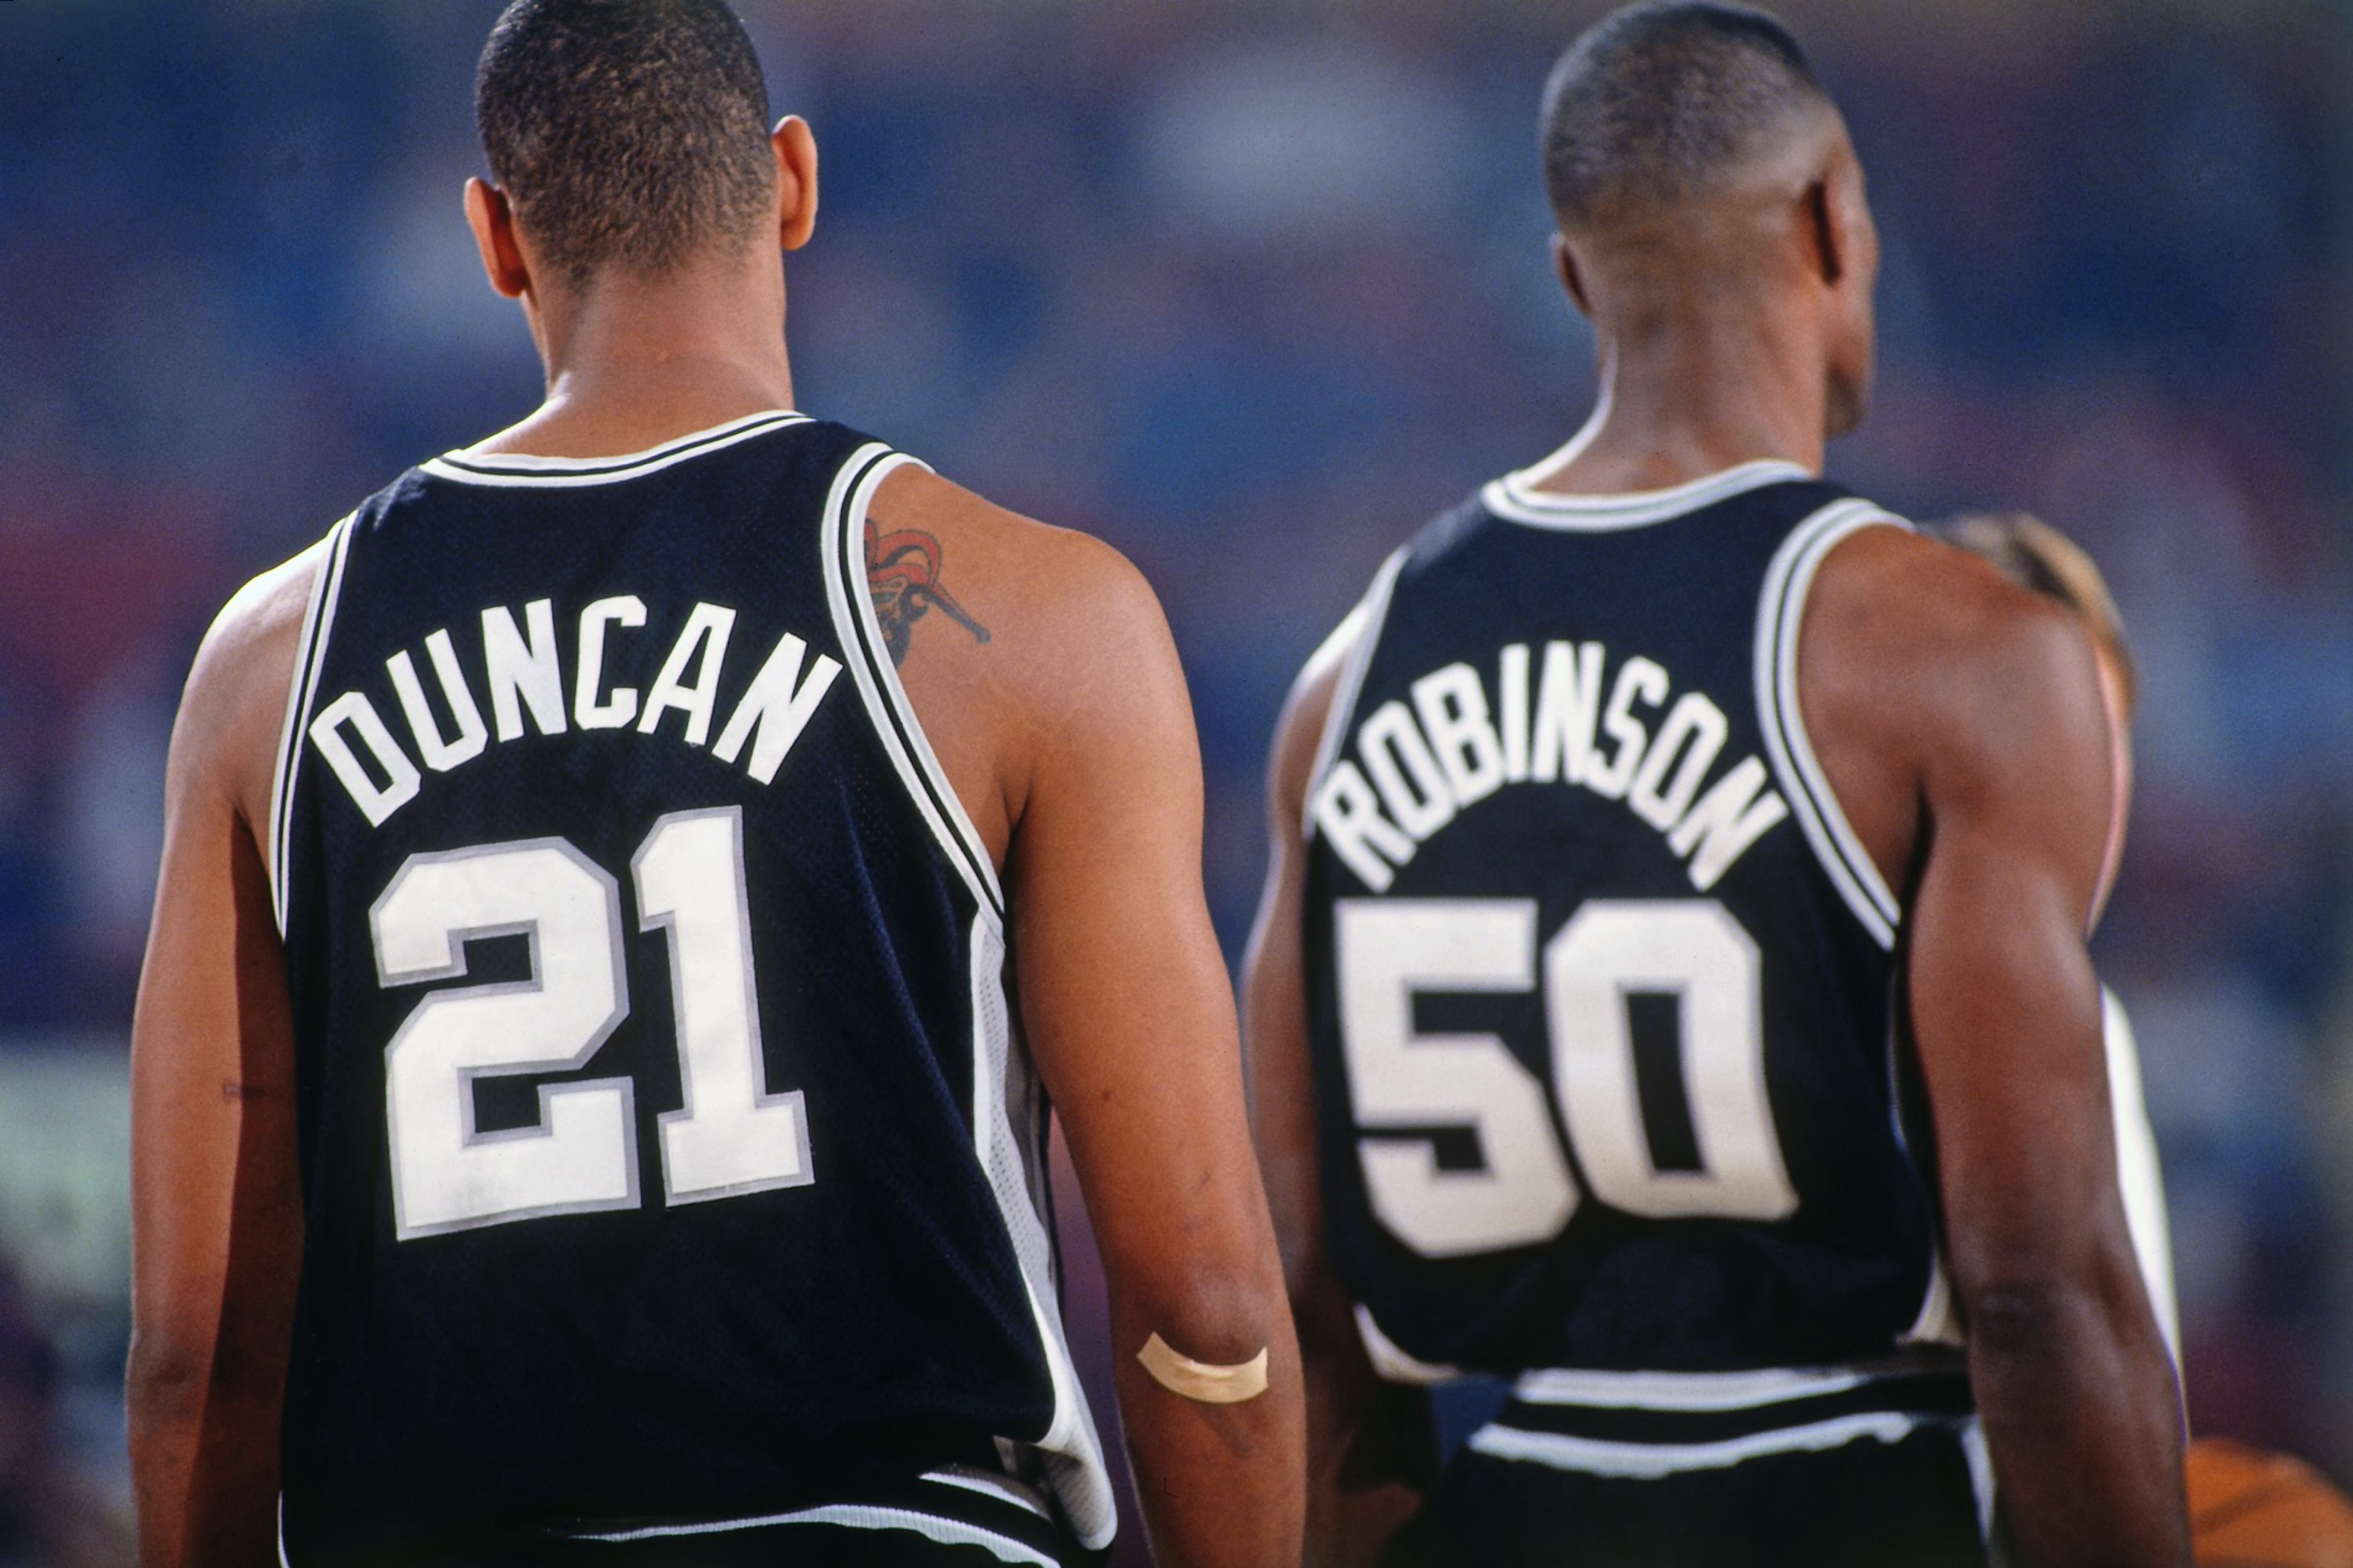 Robert Horry says Hakeem was '20 times better' than Tim Duncan